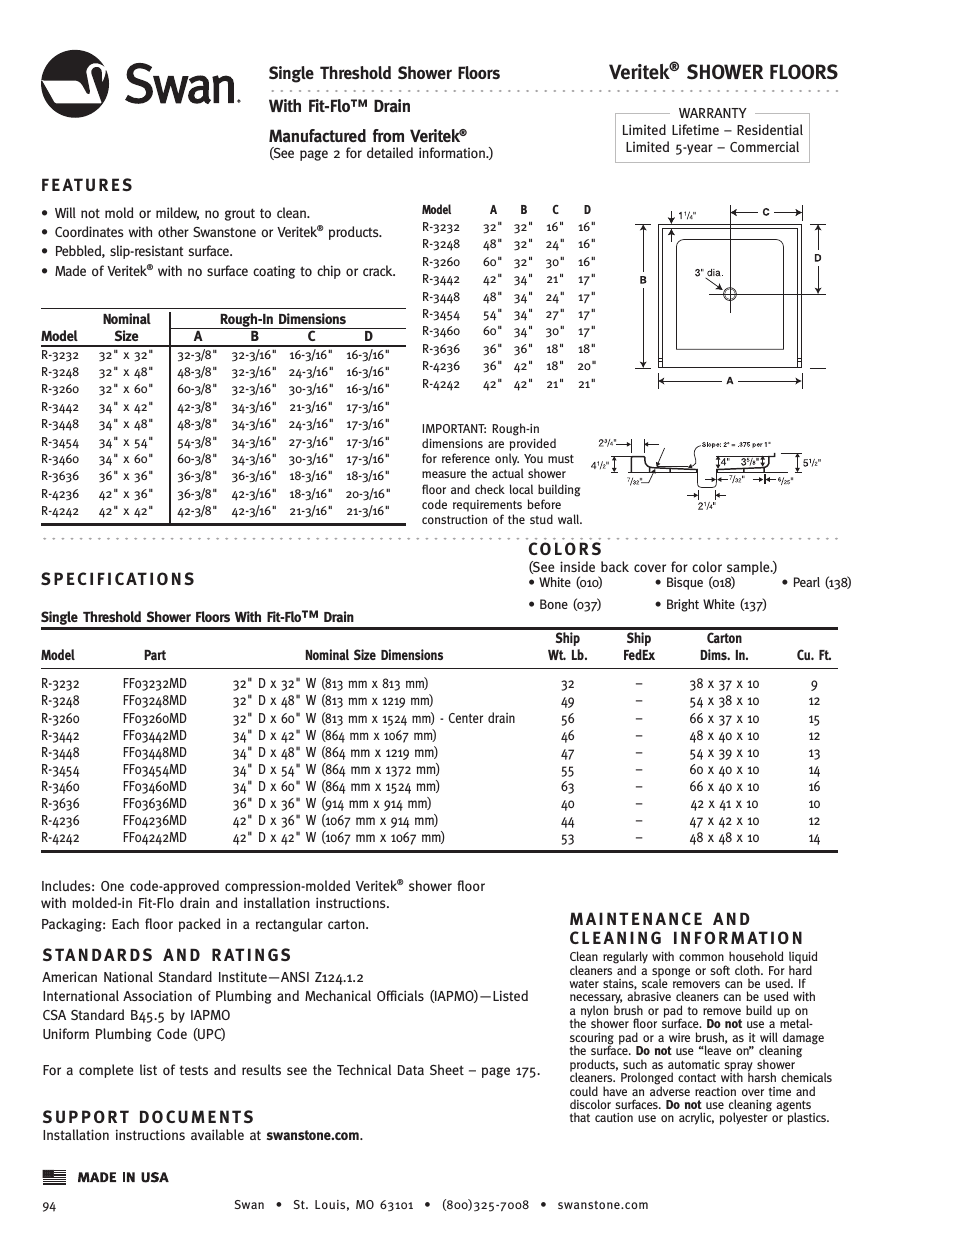 R-4242 - Specification